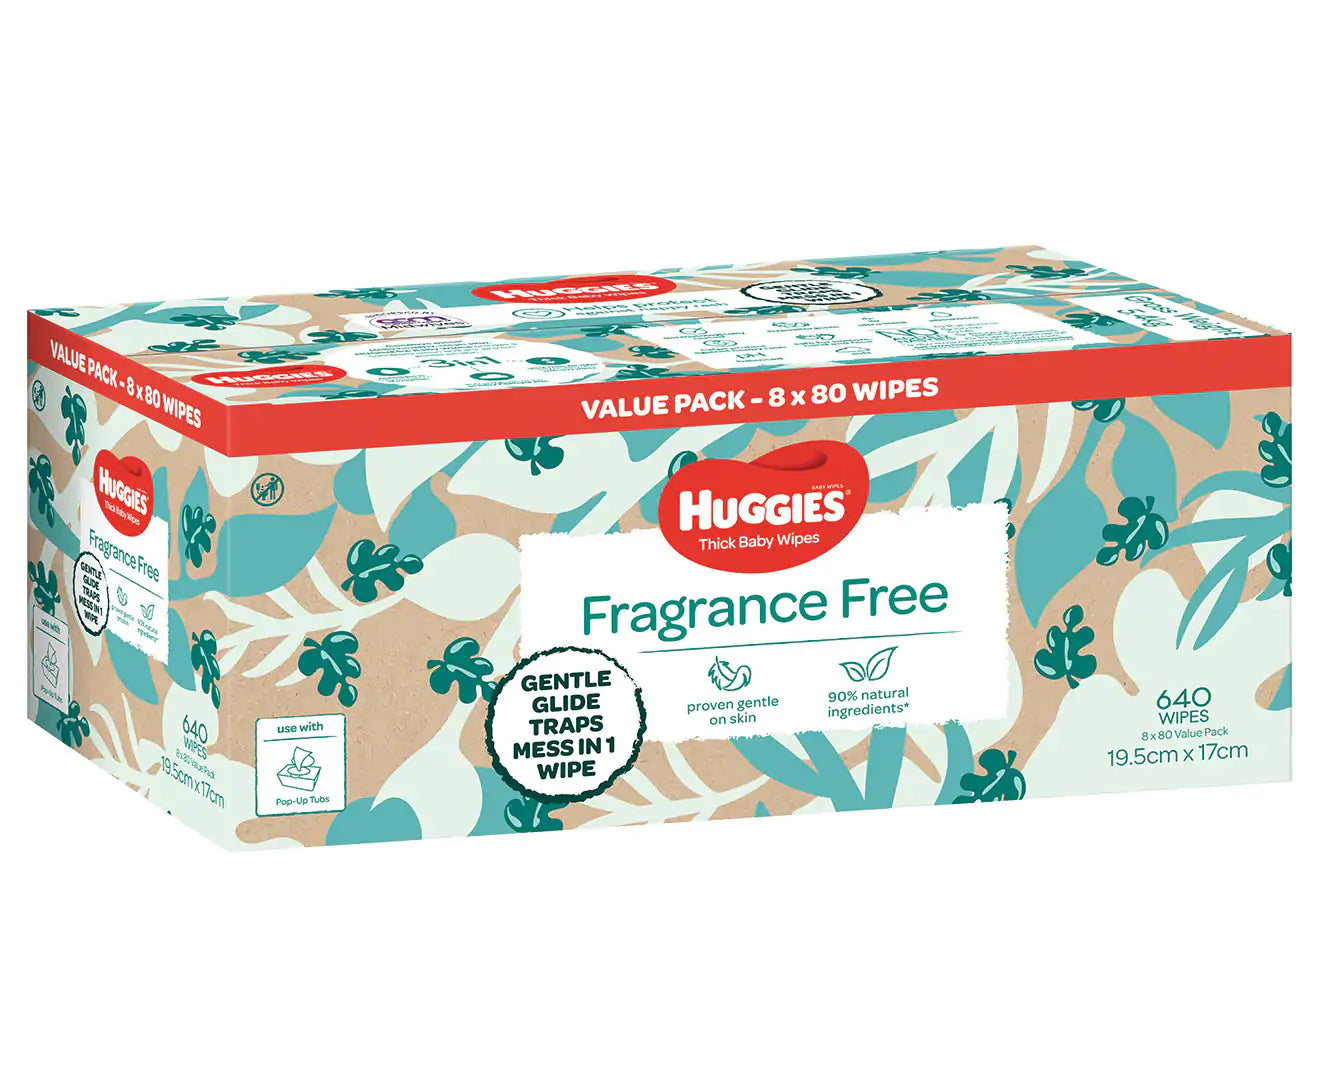 Huggies Newborn Size 1 Up to 5kg Nappies & Fragrance Free Baby Wipes Bundle